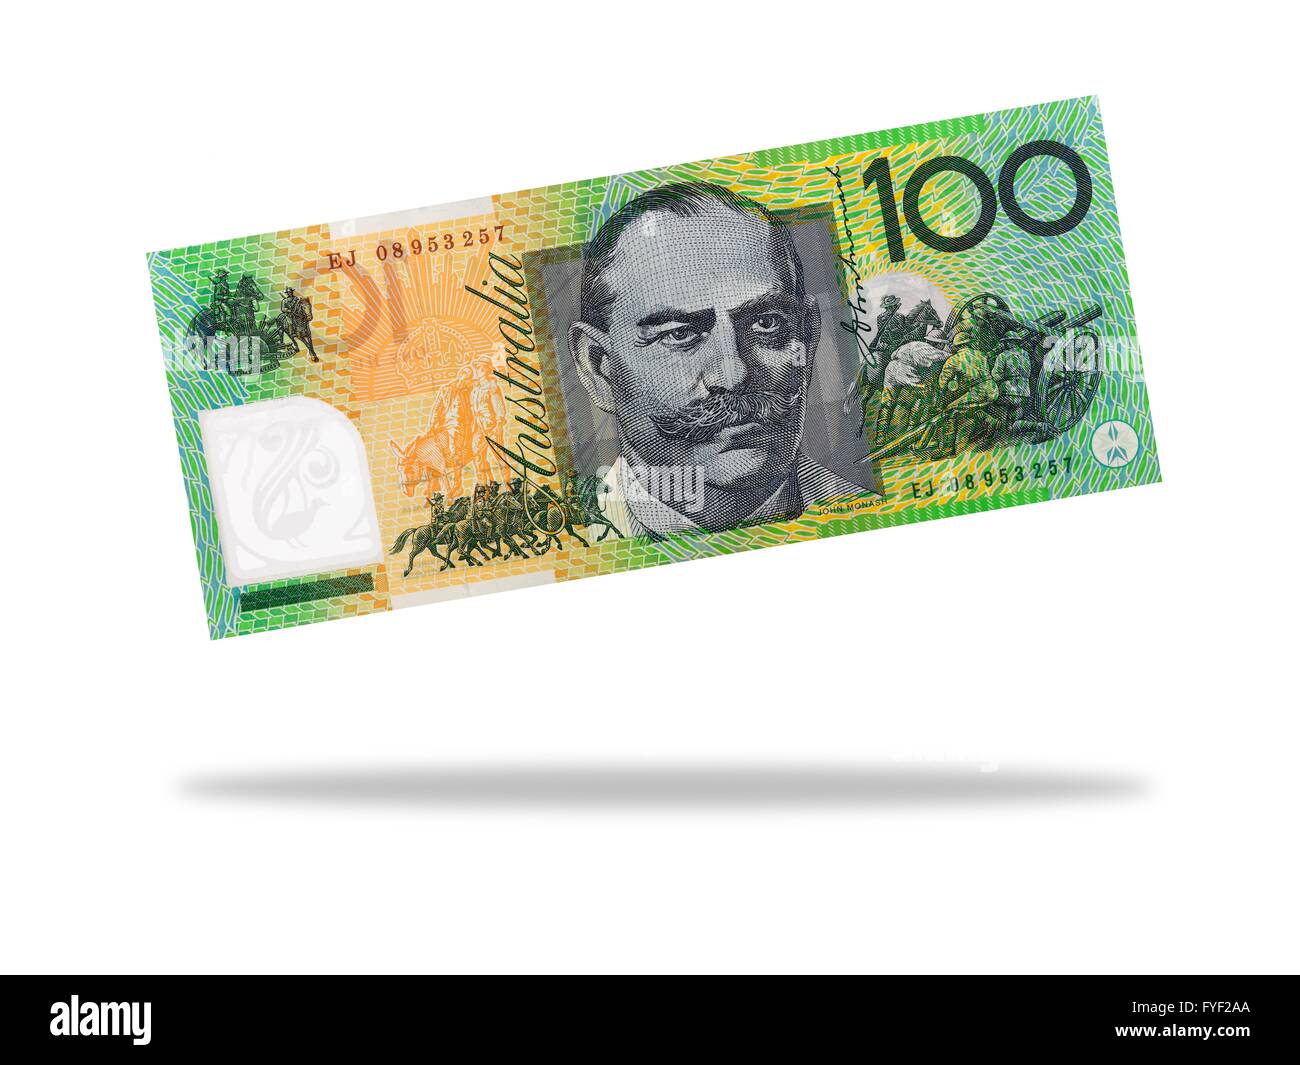 Australian one hundred dollar note isolated against a white background Stock Photo